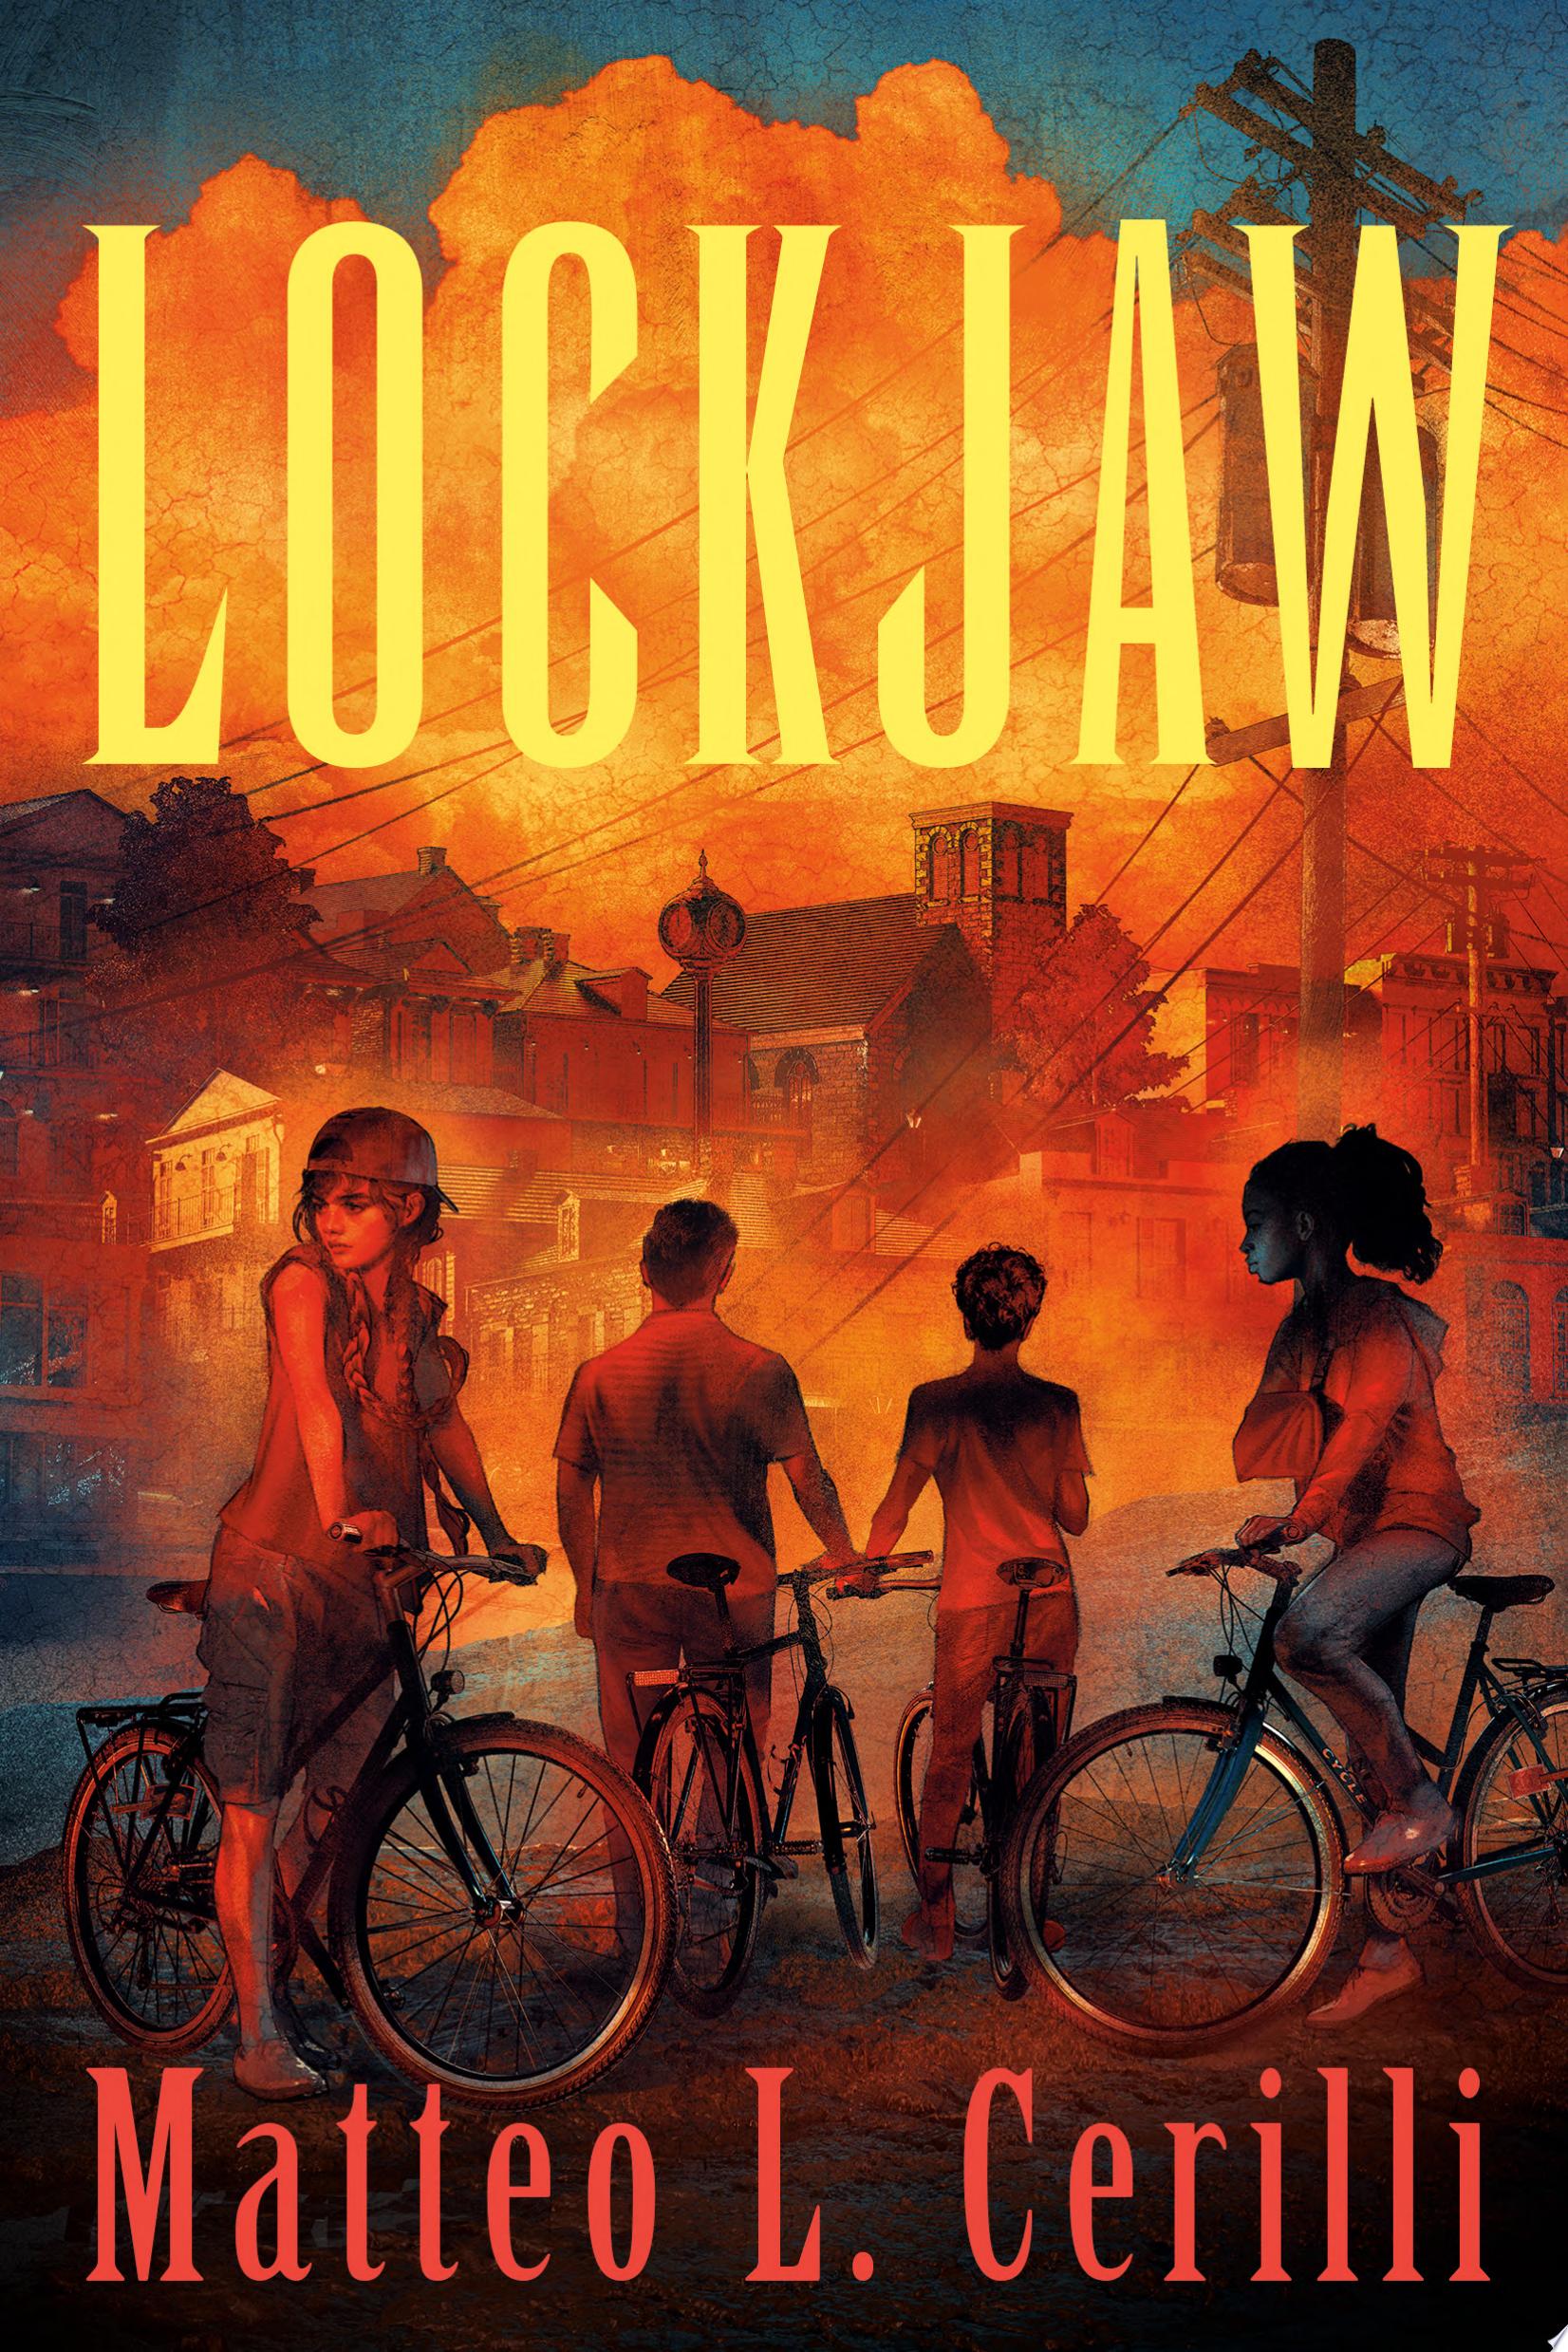 Image for "Lockjaw"